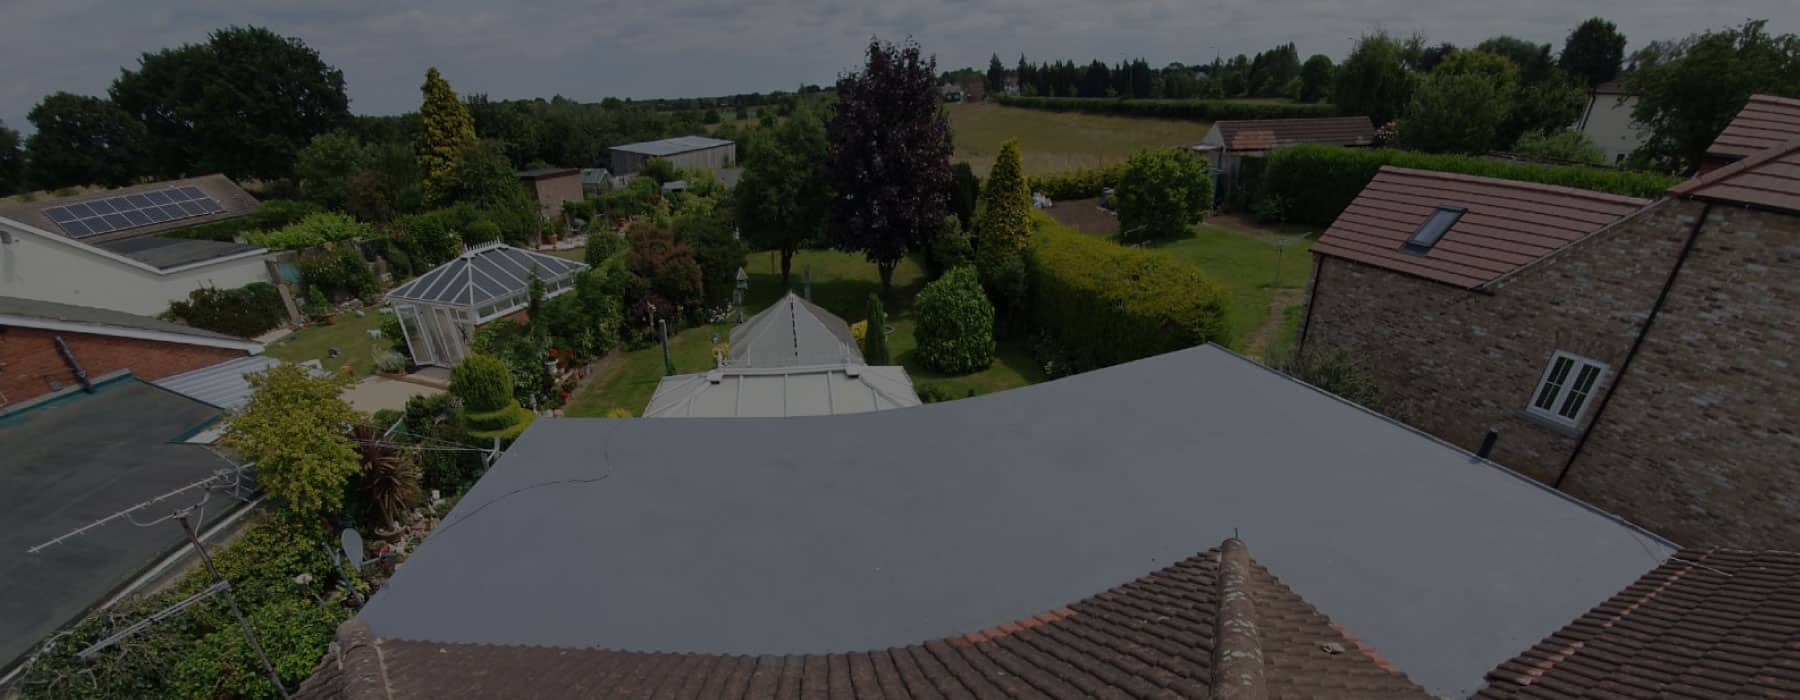 Flat Roofing construction by our roofers in the Doncaster and Scunthorpe area